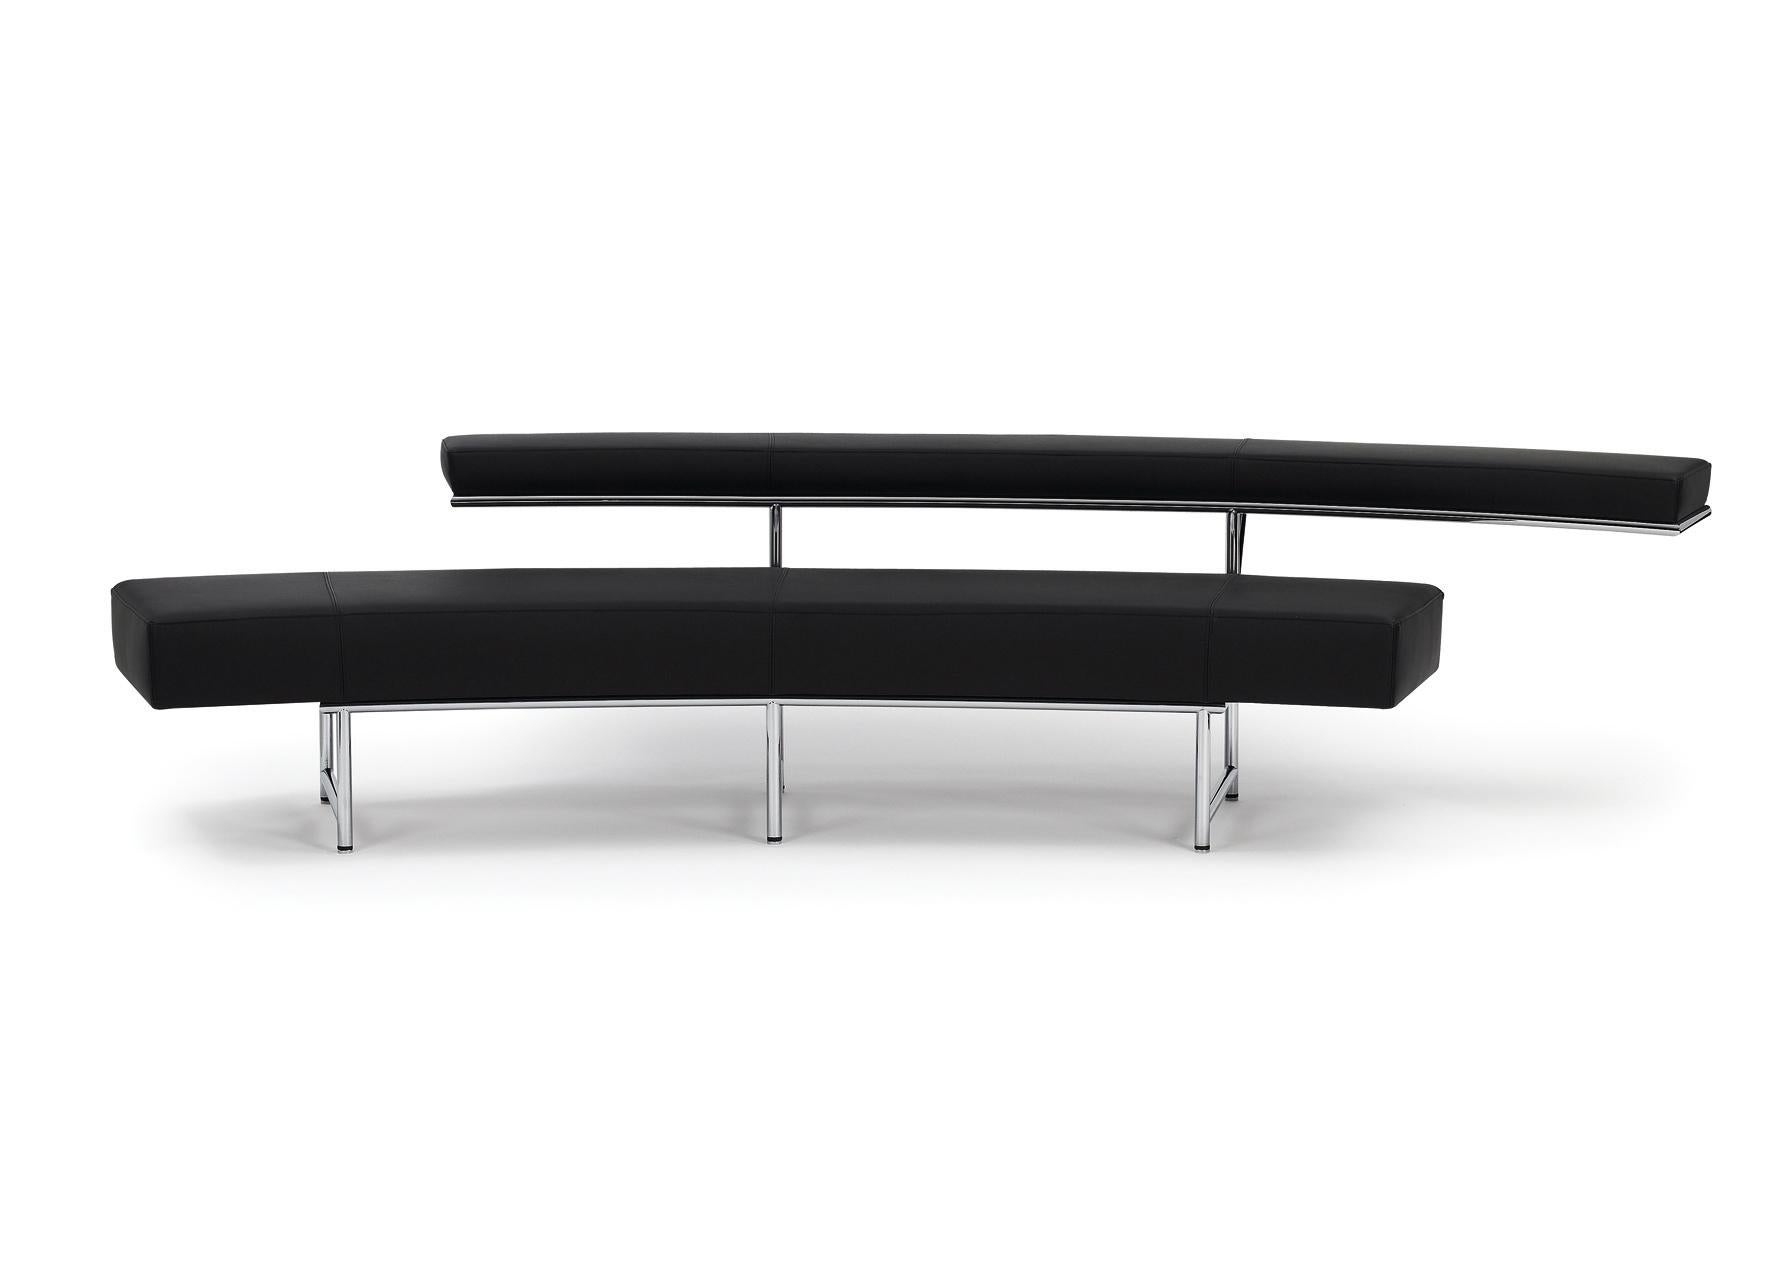 price for fabric!

Eileen Gray‘s perhaps most exclusive sofa radiates an allure from which no beholder can escape. The soft curve, the most unusual lines of the backrest make the Monte Carlo an incomparable and striking one-of-a-kind in the history